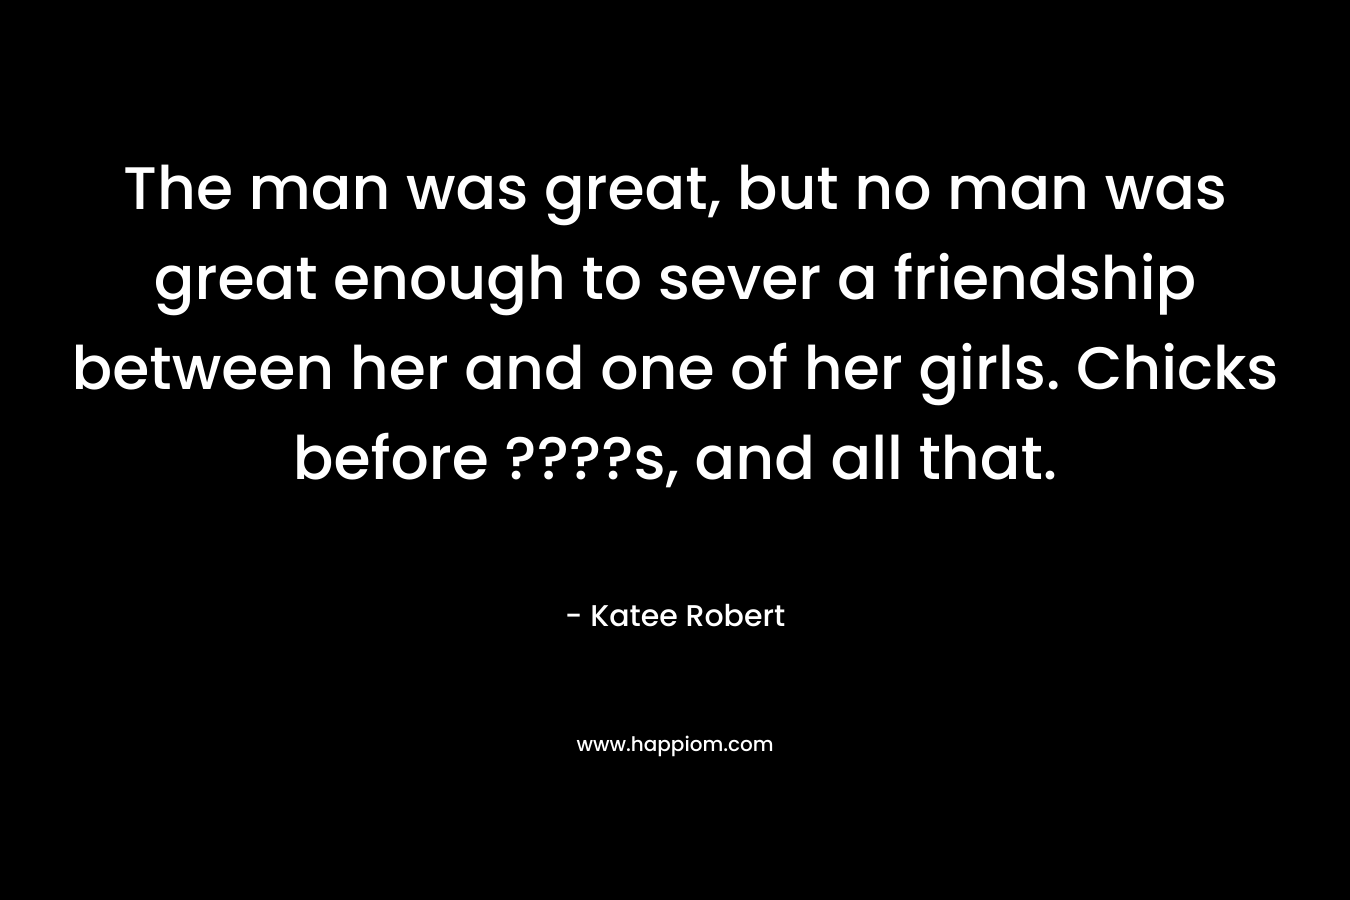 The man was great, but no man was great enough to sever a friendship between her and one of her girls. Chicks before ????s, and all that. – Katee Robert